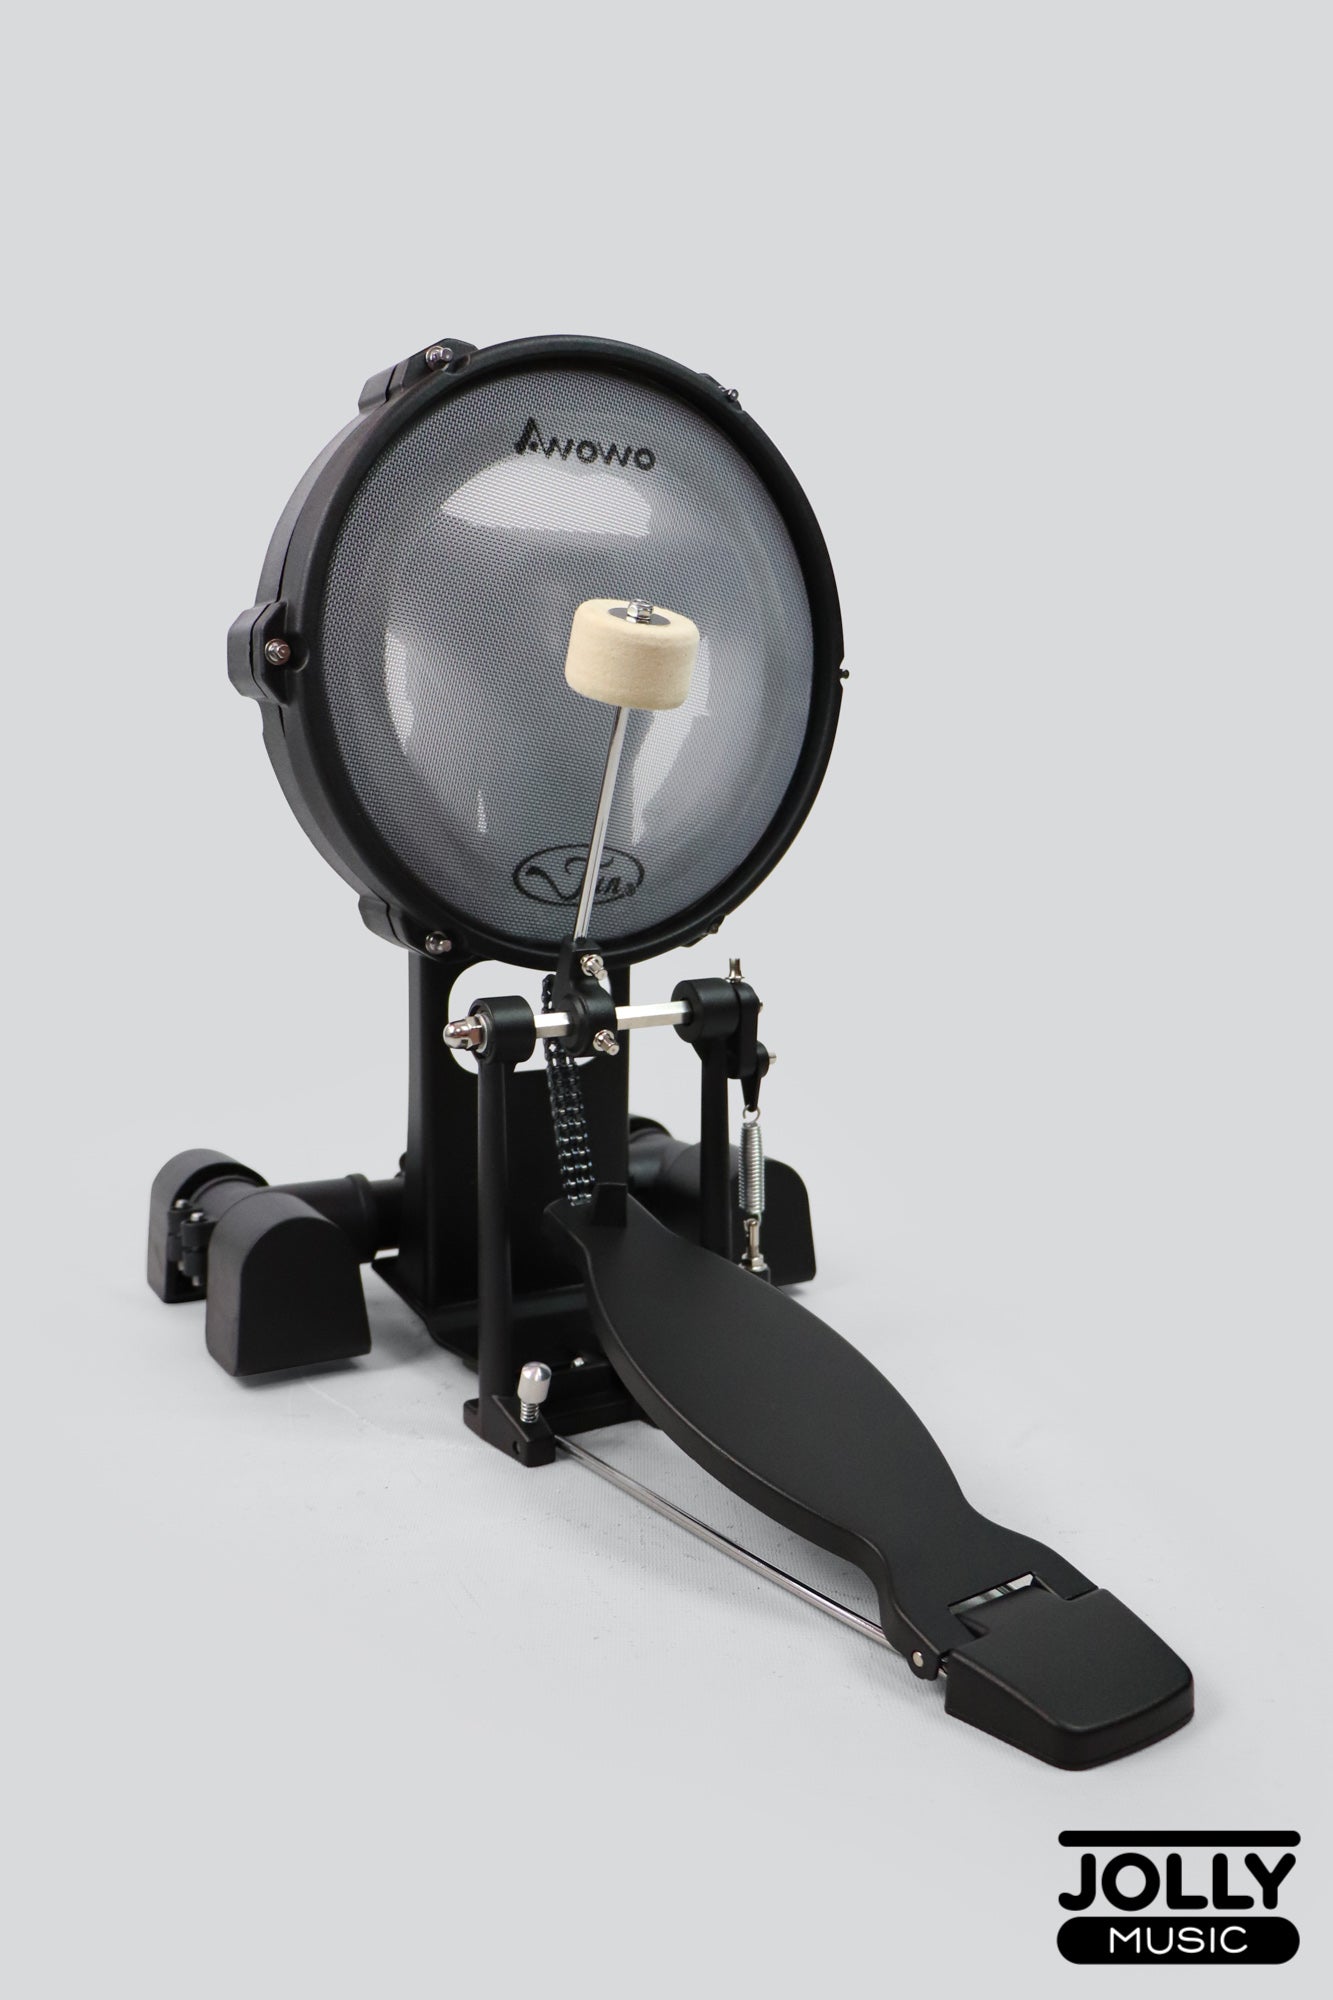 AWOWO EABD1 Electronic Kick Drum with Pedal